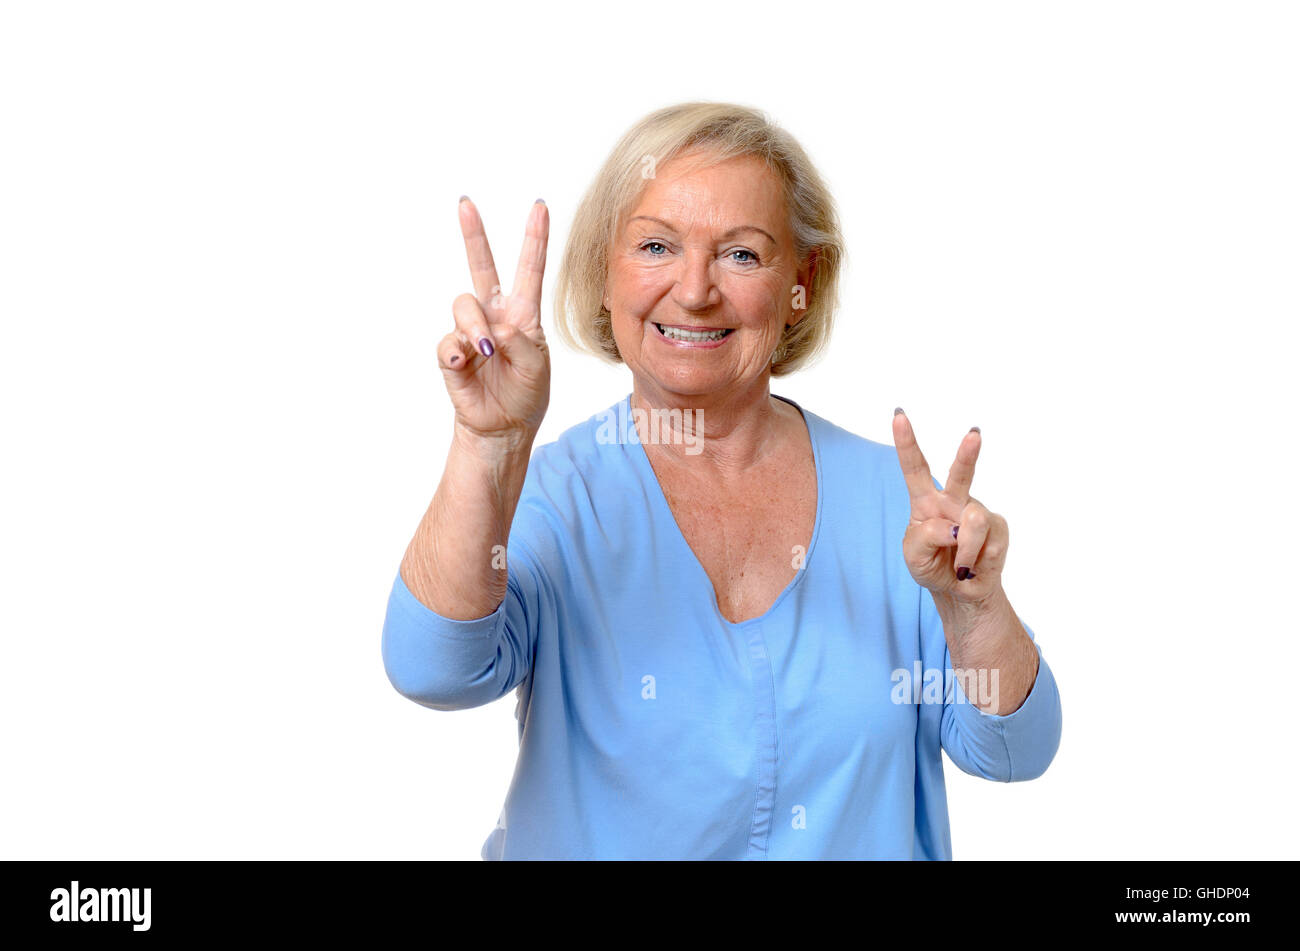 Smiling attractive blond elderly woman giving a double v-sign for peace or victory,upper body isolated on white Stock Photo